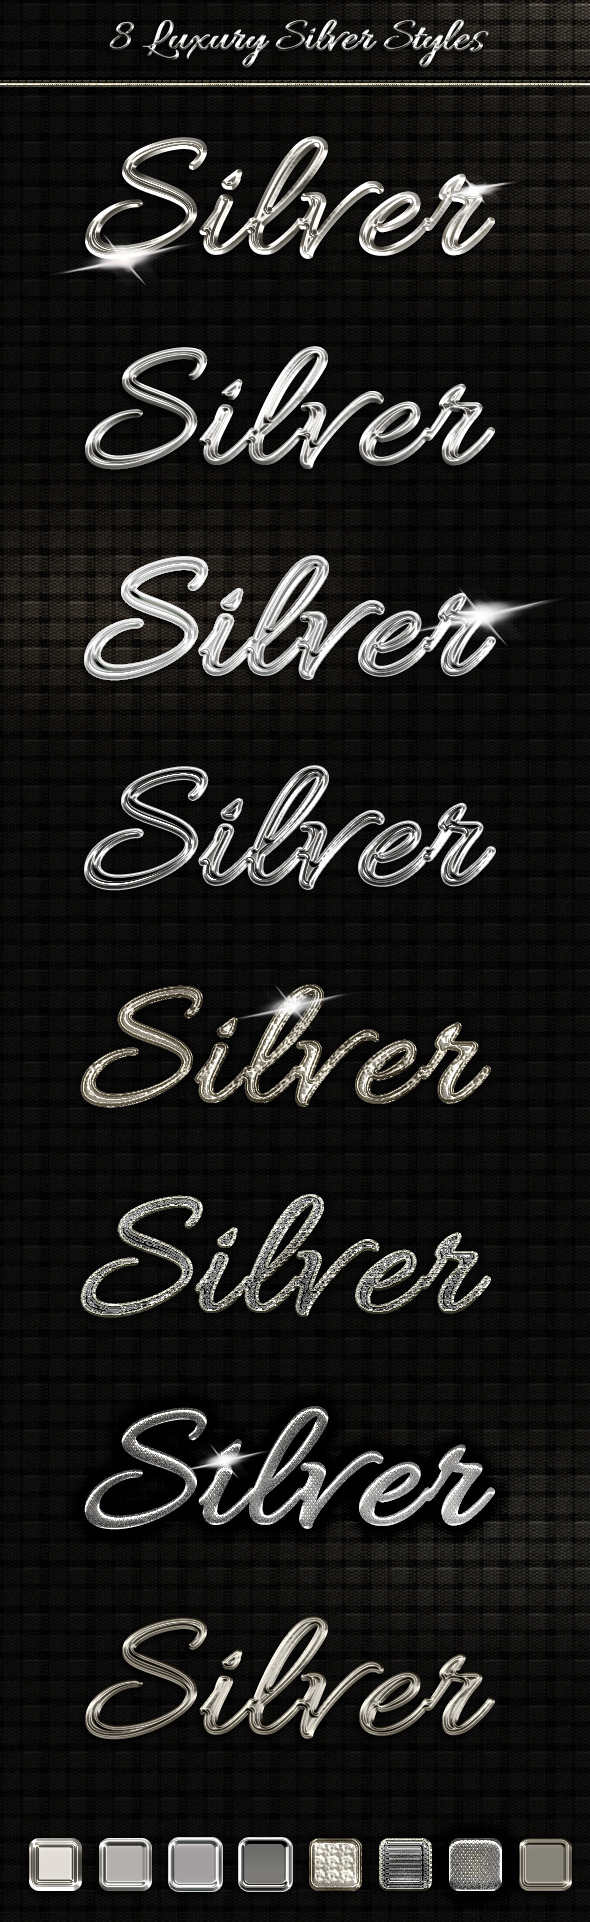 8 Luxury Silver Text Styles